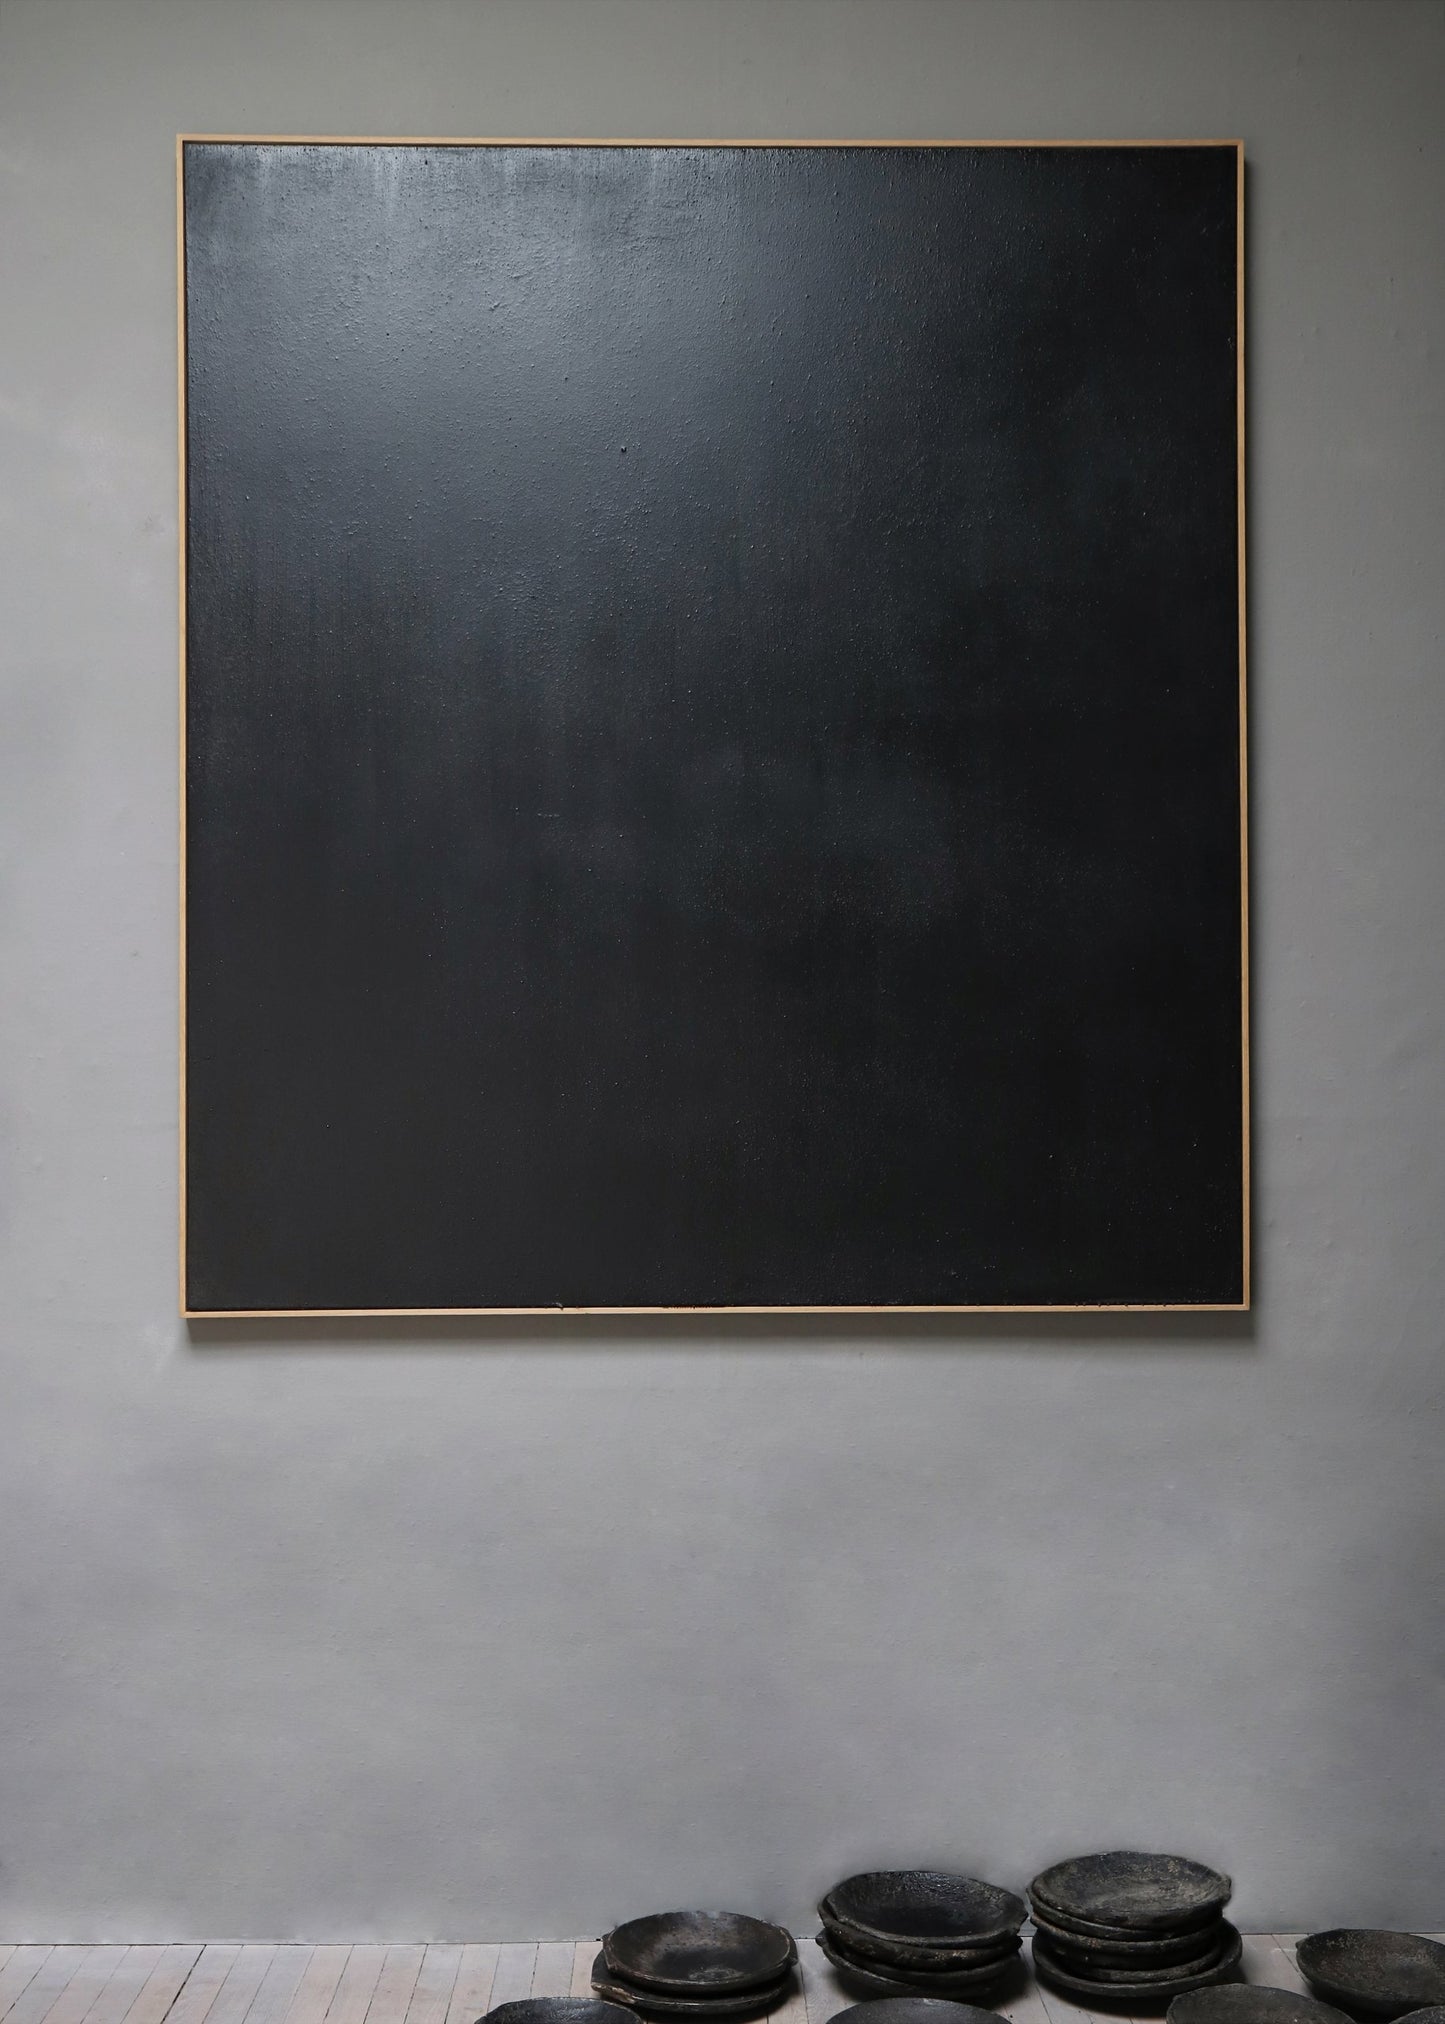 OIL, ASH AND PIGMENT ON CANVAS #1 BY RASMUS ROSENGAARD